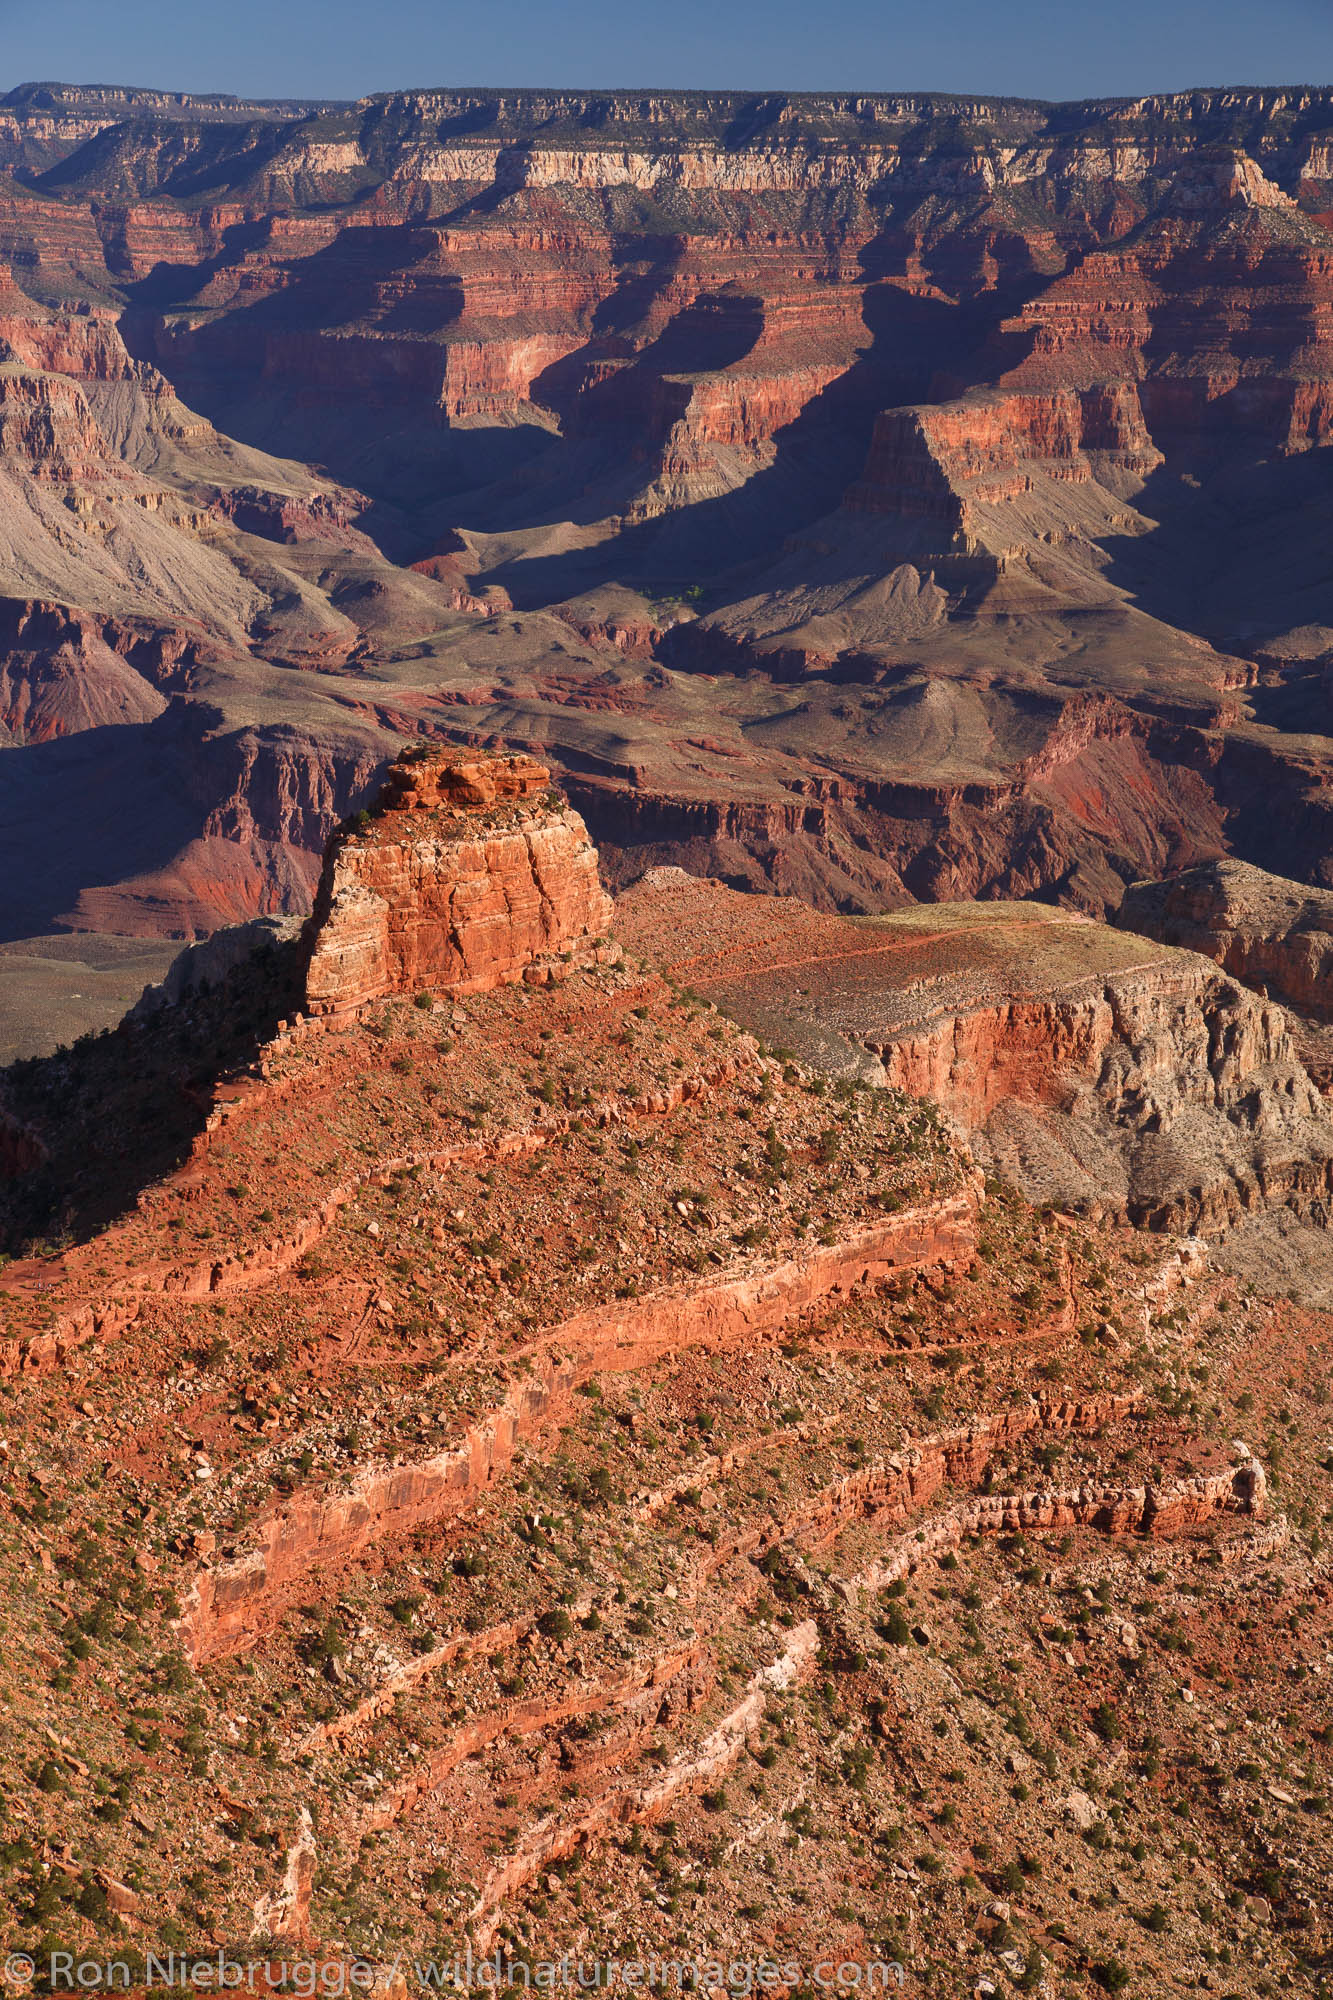 View from Ooh-ahh Point, South Kaibab Trail, Grand Canyon National Park, Arizona.